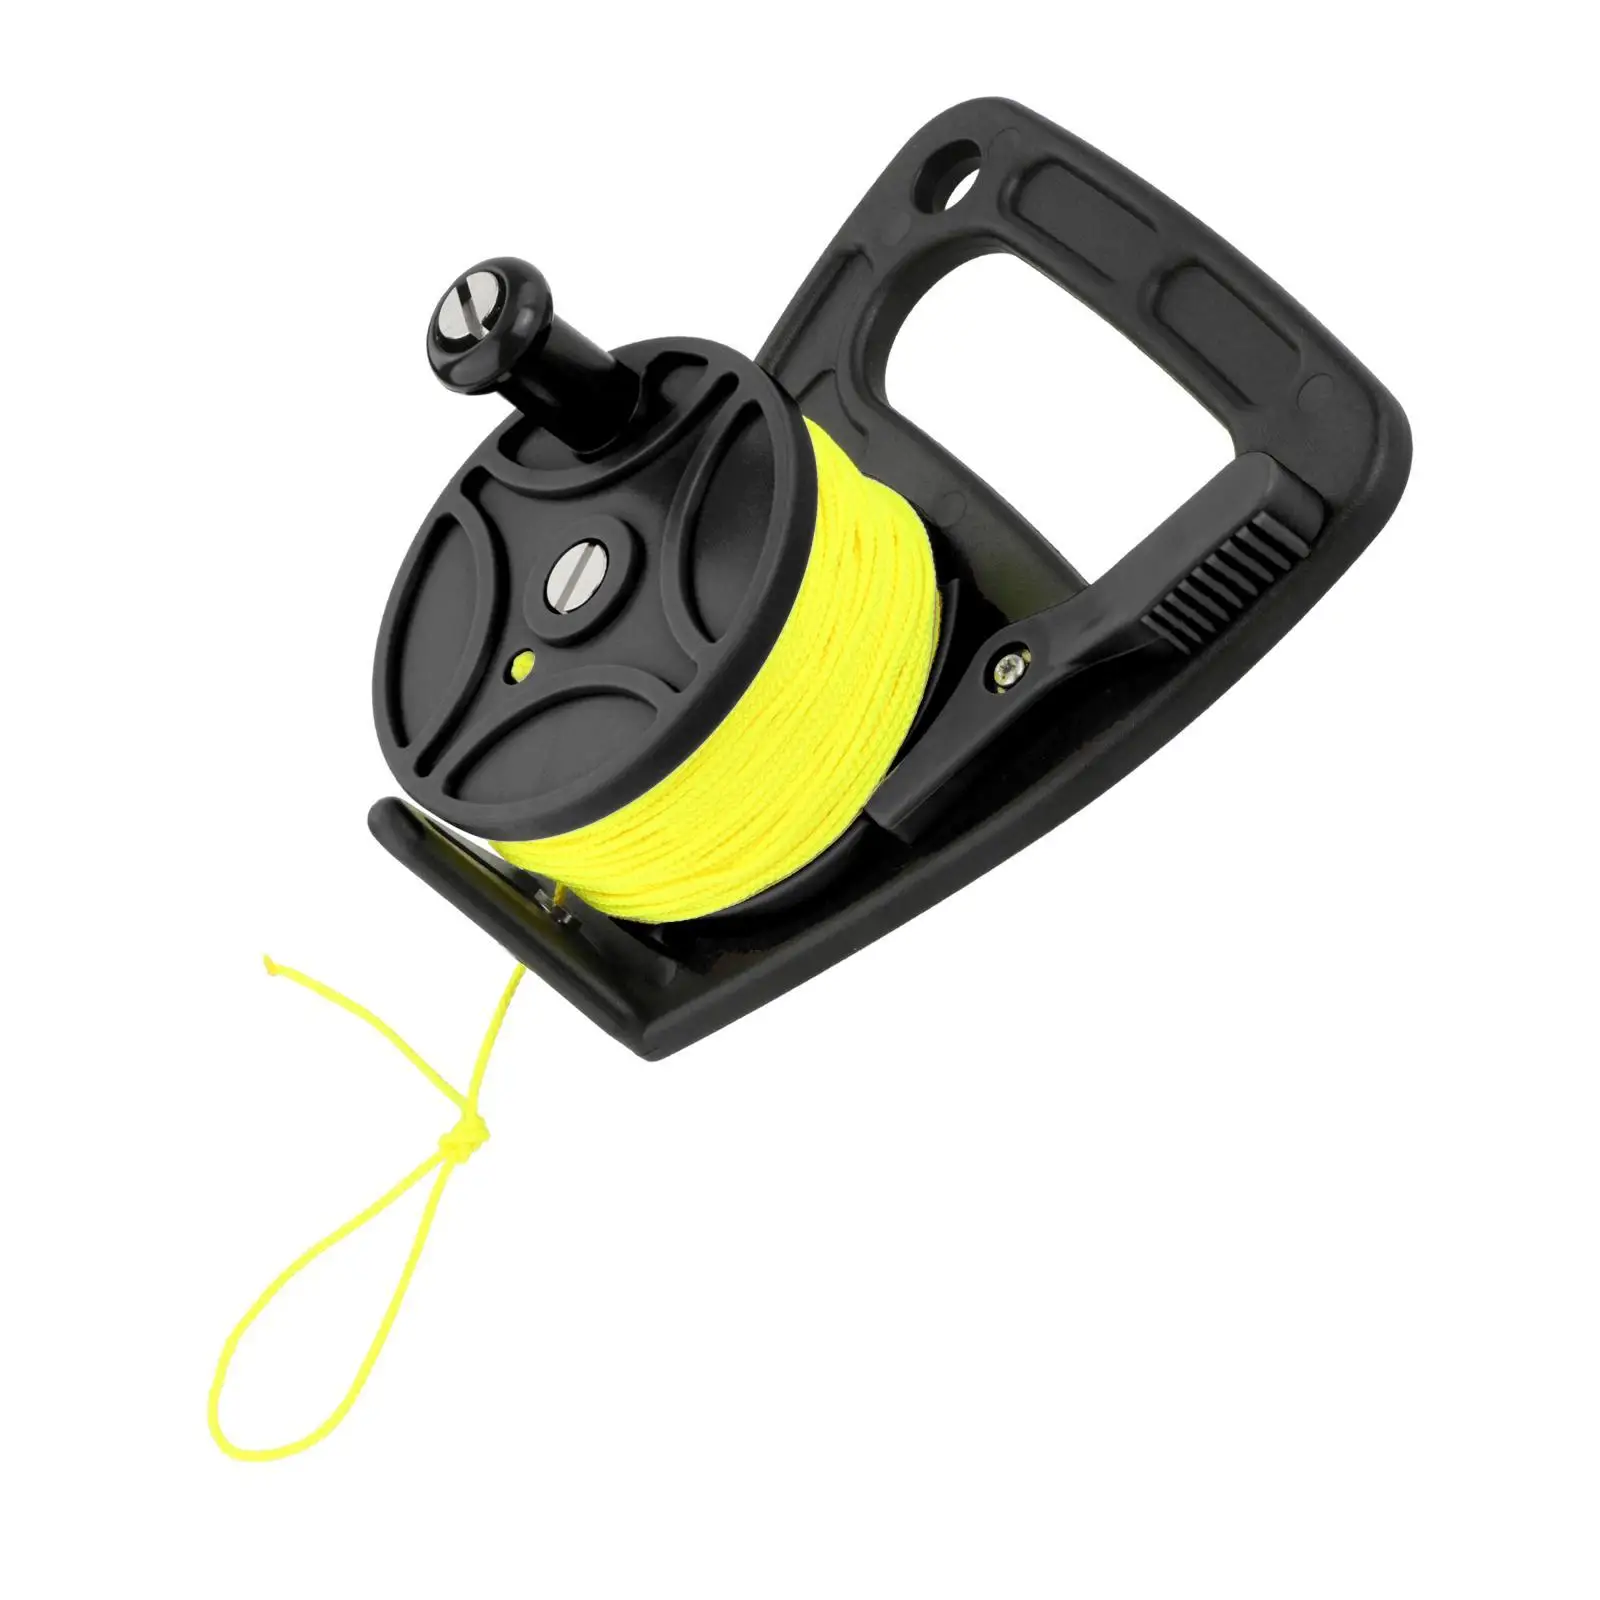 https://ae01.alicdn.com/kf/Sa398382049dc4c37ac8d5552bed39f6ep/Scuba-Diving-Line-Reel-with-Thumb-Stopper-Kayak-Anchor-Scuba-Diving-Divers-Anchor-Equipment-for-Spear.jpg